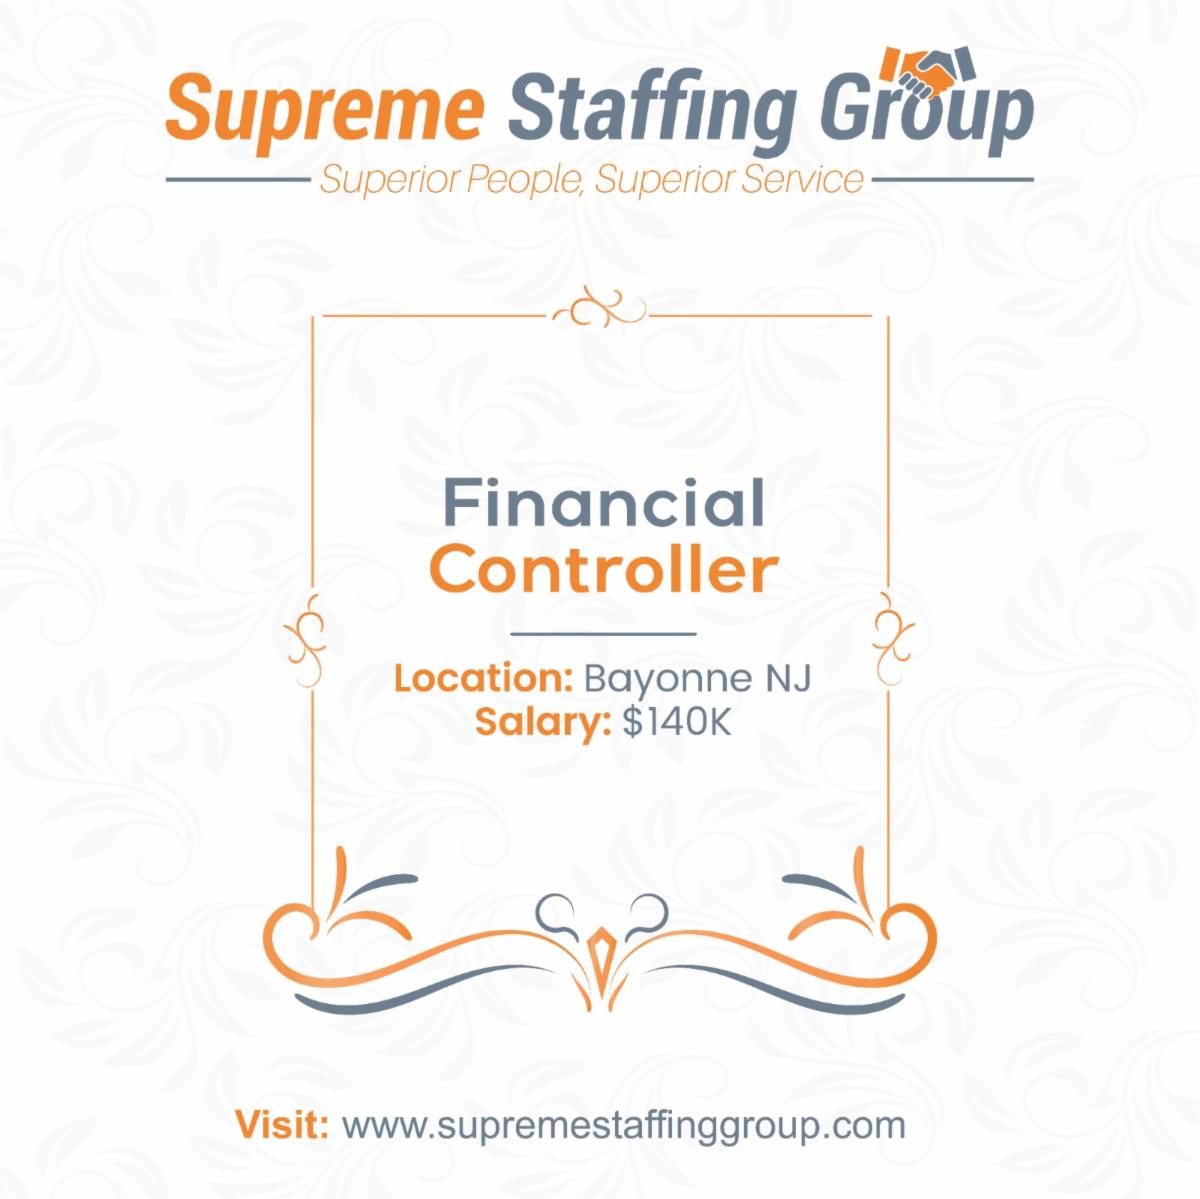 Unleash your financial prowess as a Financial Controller at a cutting-edge distribution company in Bayonne, NJ! 🌟  

Apply today: bit.ly/3pBsV2V

#FinancialController #JobOpportunity #DistributionCompany #BayonneNJ #FinancialOperations  #CareerGrowth #CompetitiveSalary